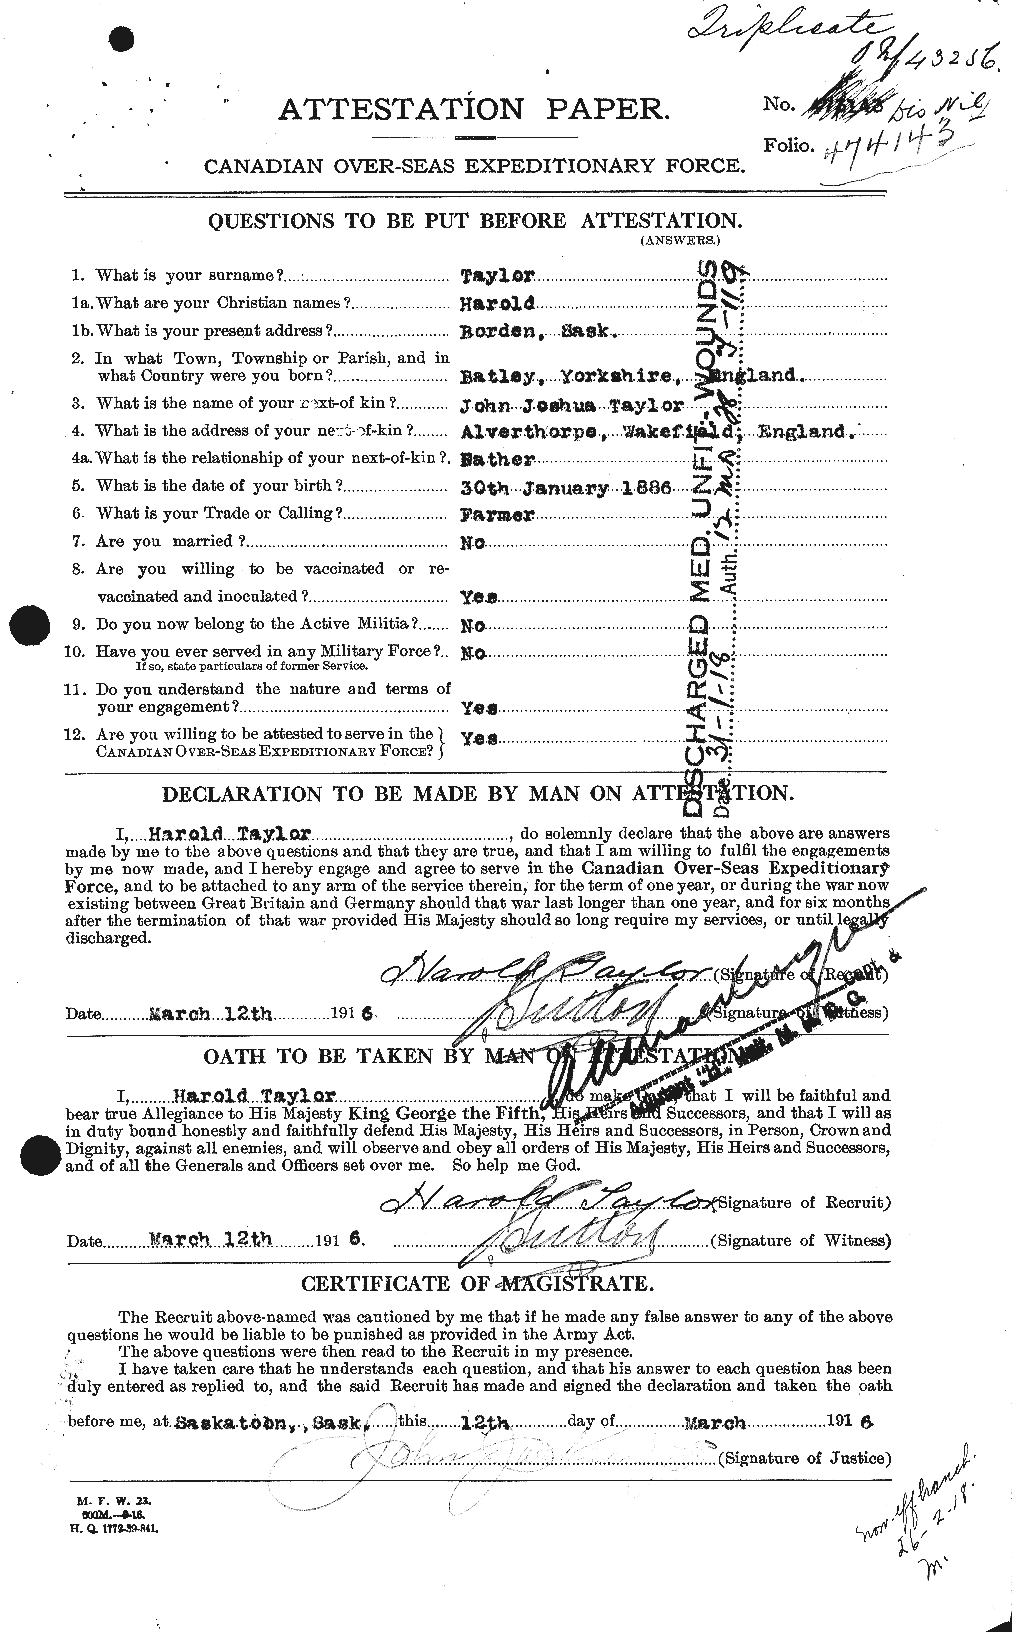 Personnel Records of the First World War - CEF 626404a